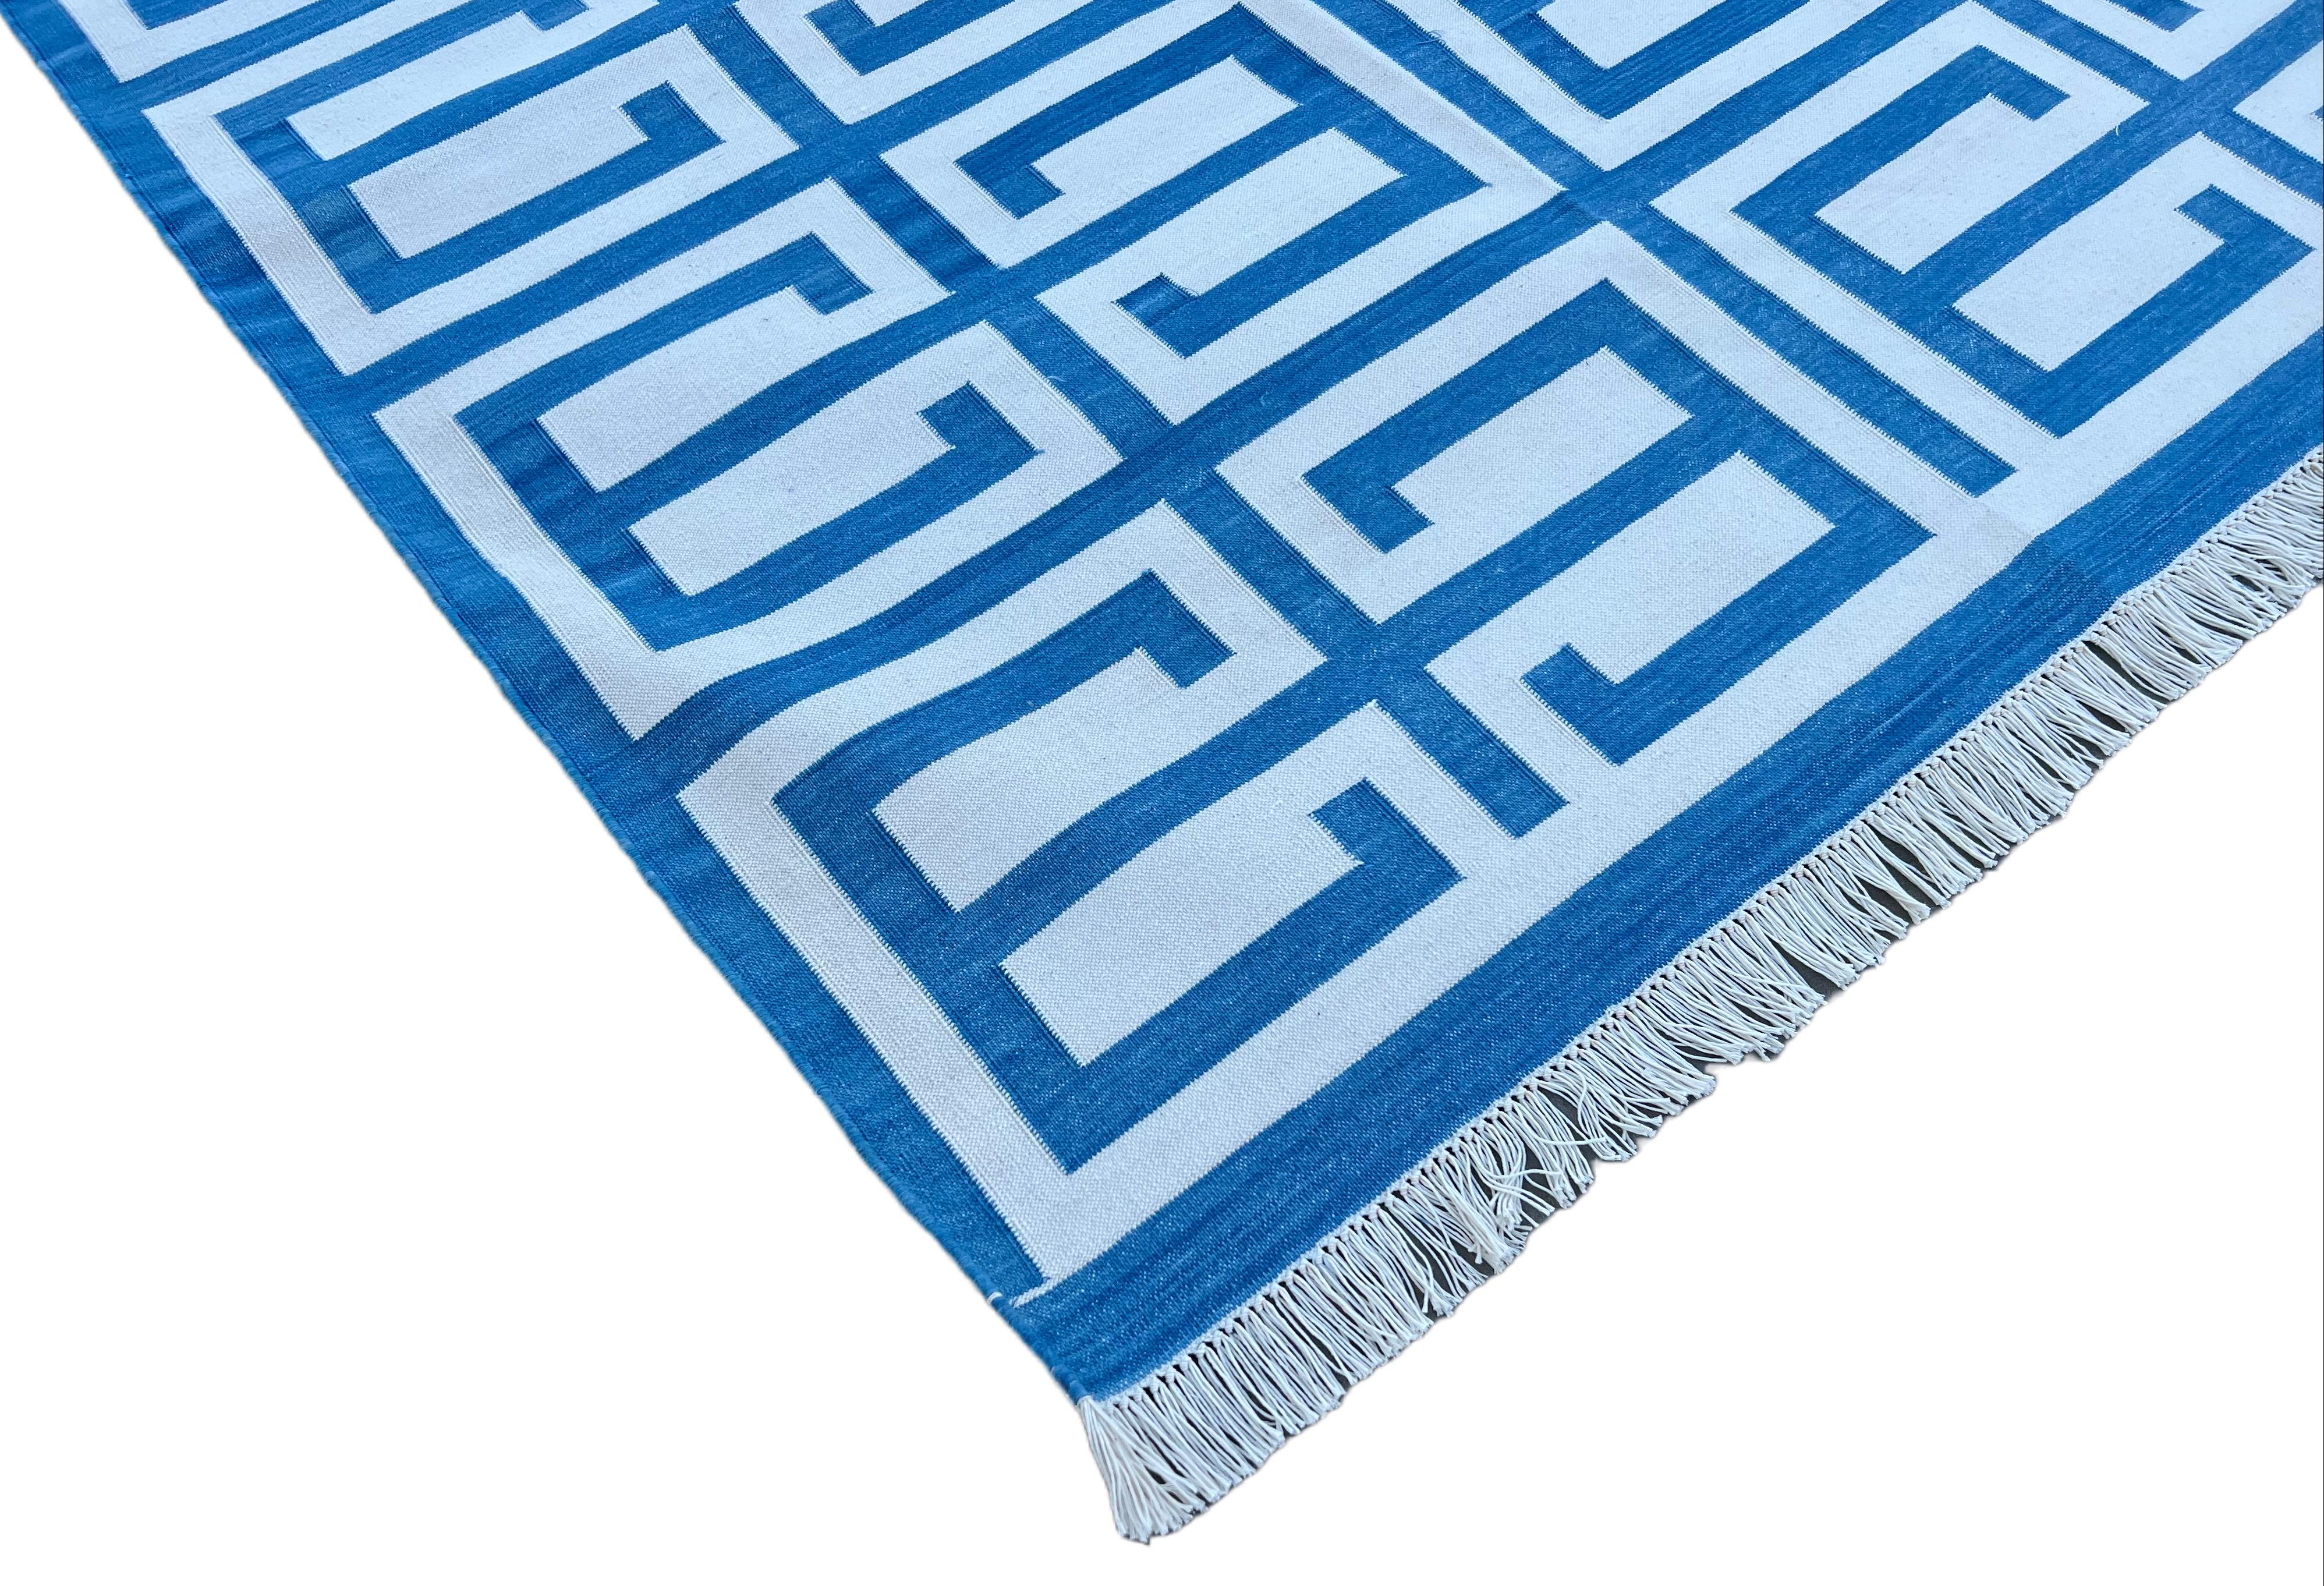 Mid-Century Modern Handmade Cotton Area Flat Weave Rug, Blue And White Geometric Indian Dhurrie Rug For Sale